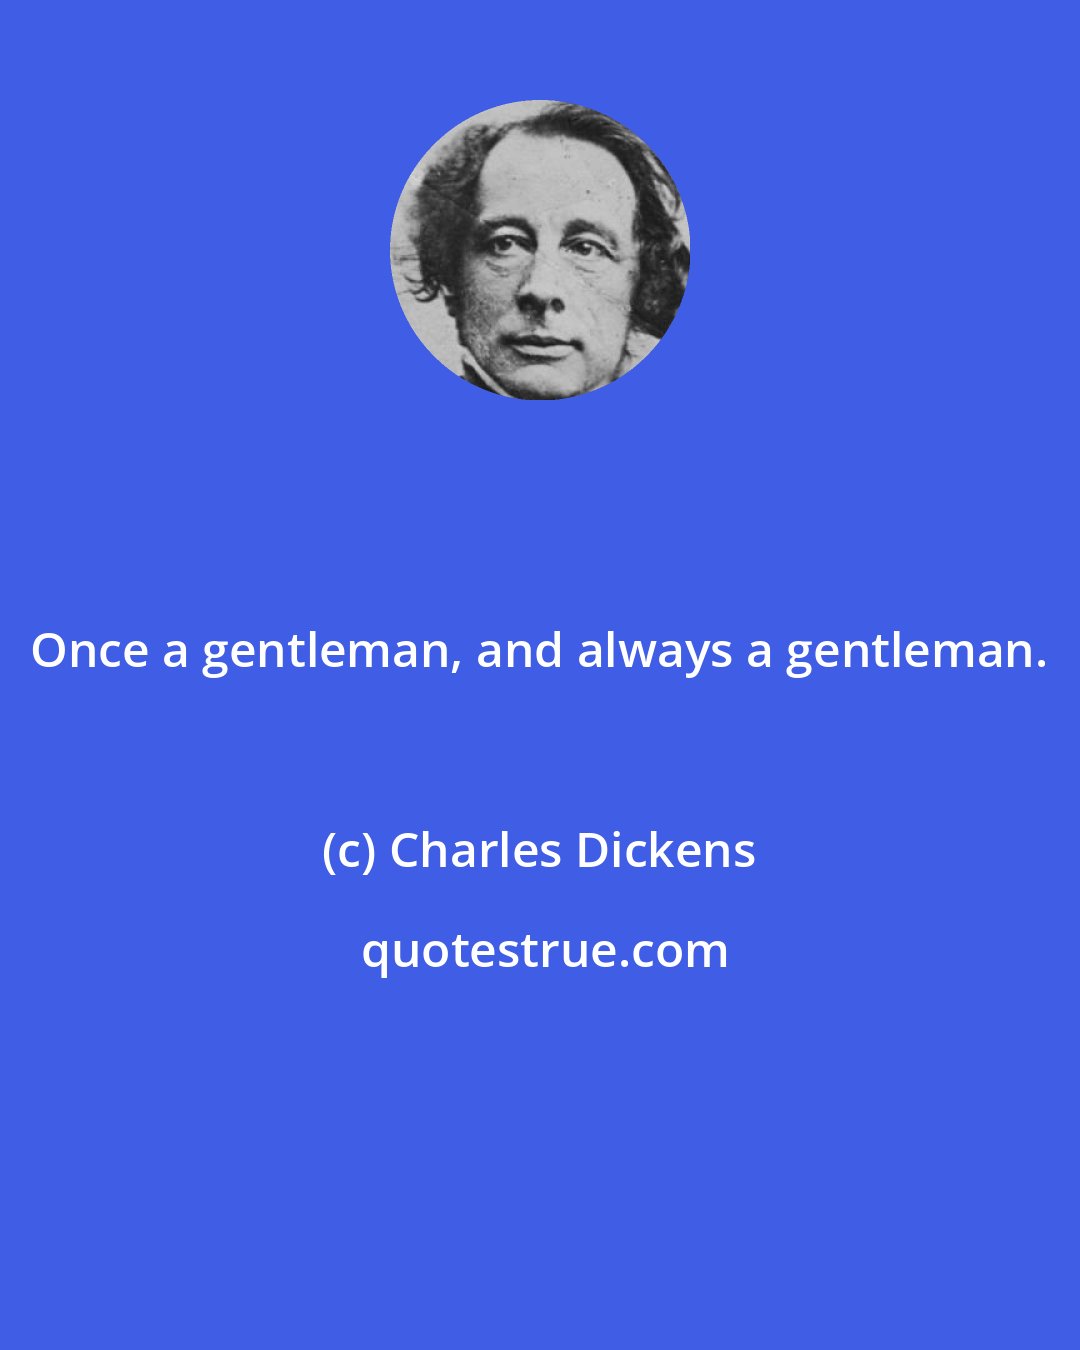 Charles Dickens: Once a gentleman, and always a gentleman.